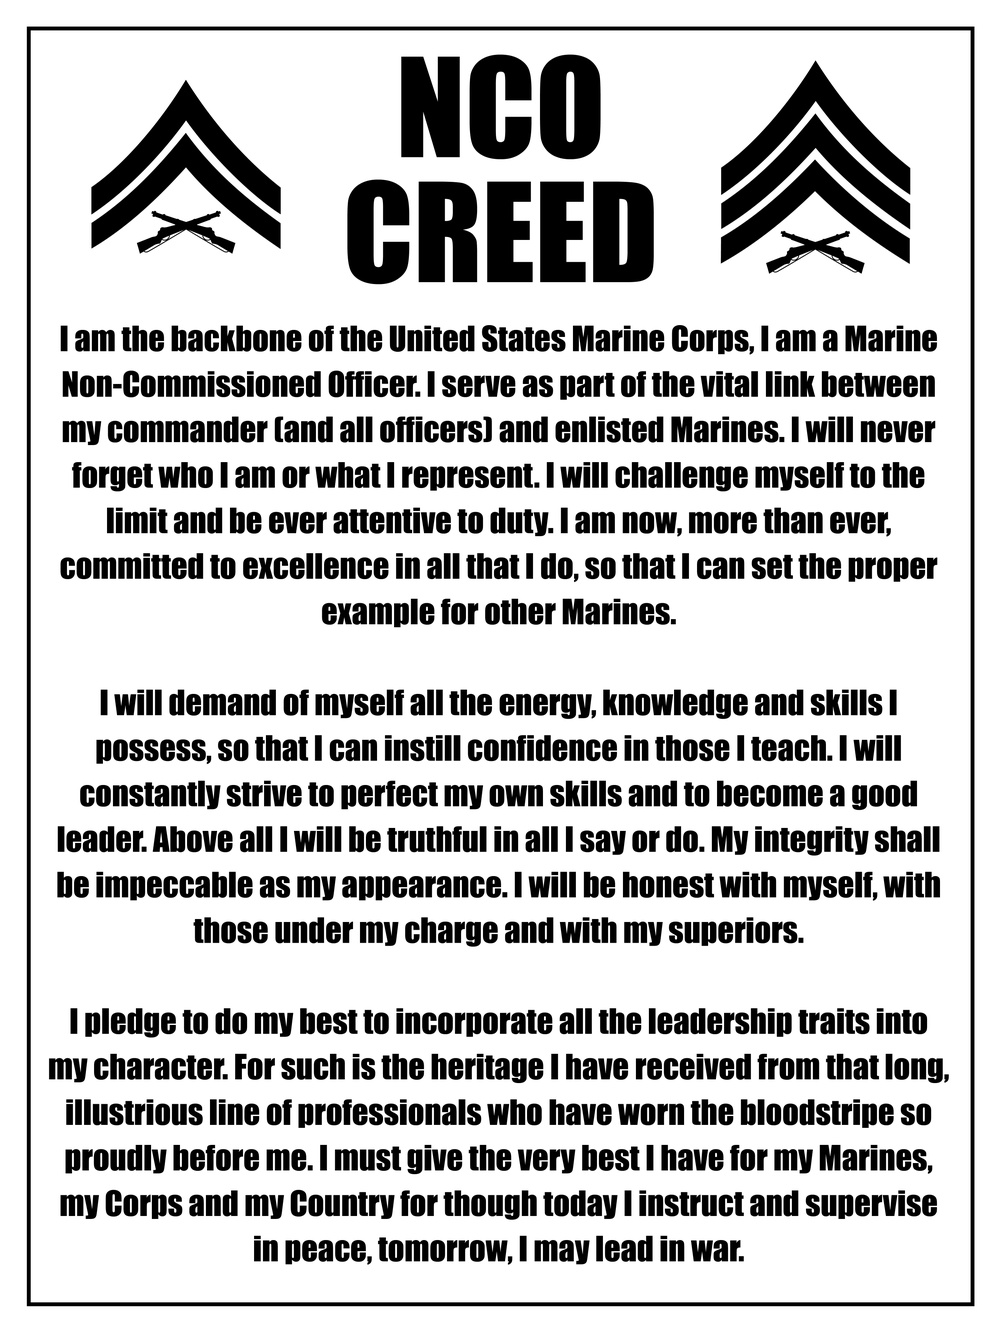 nco creed download